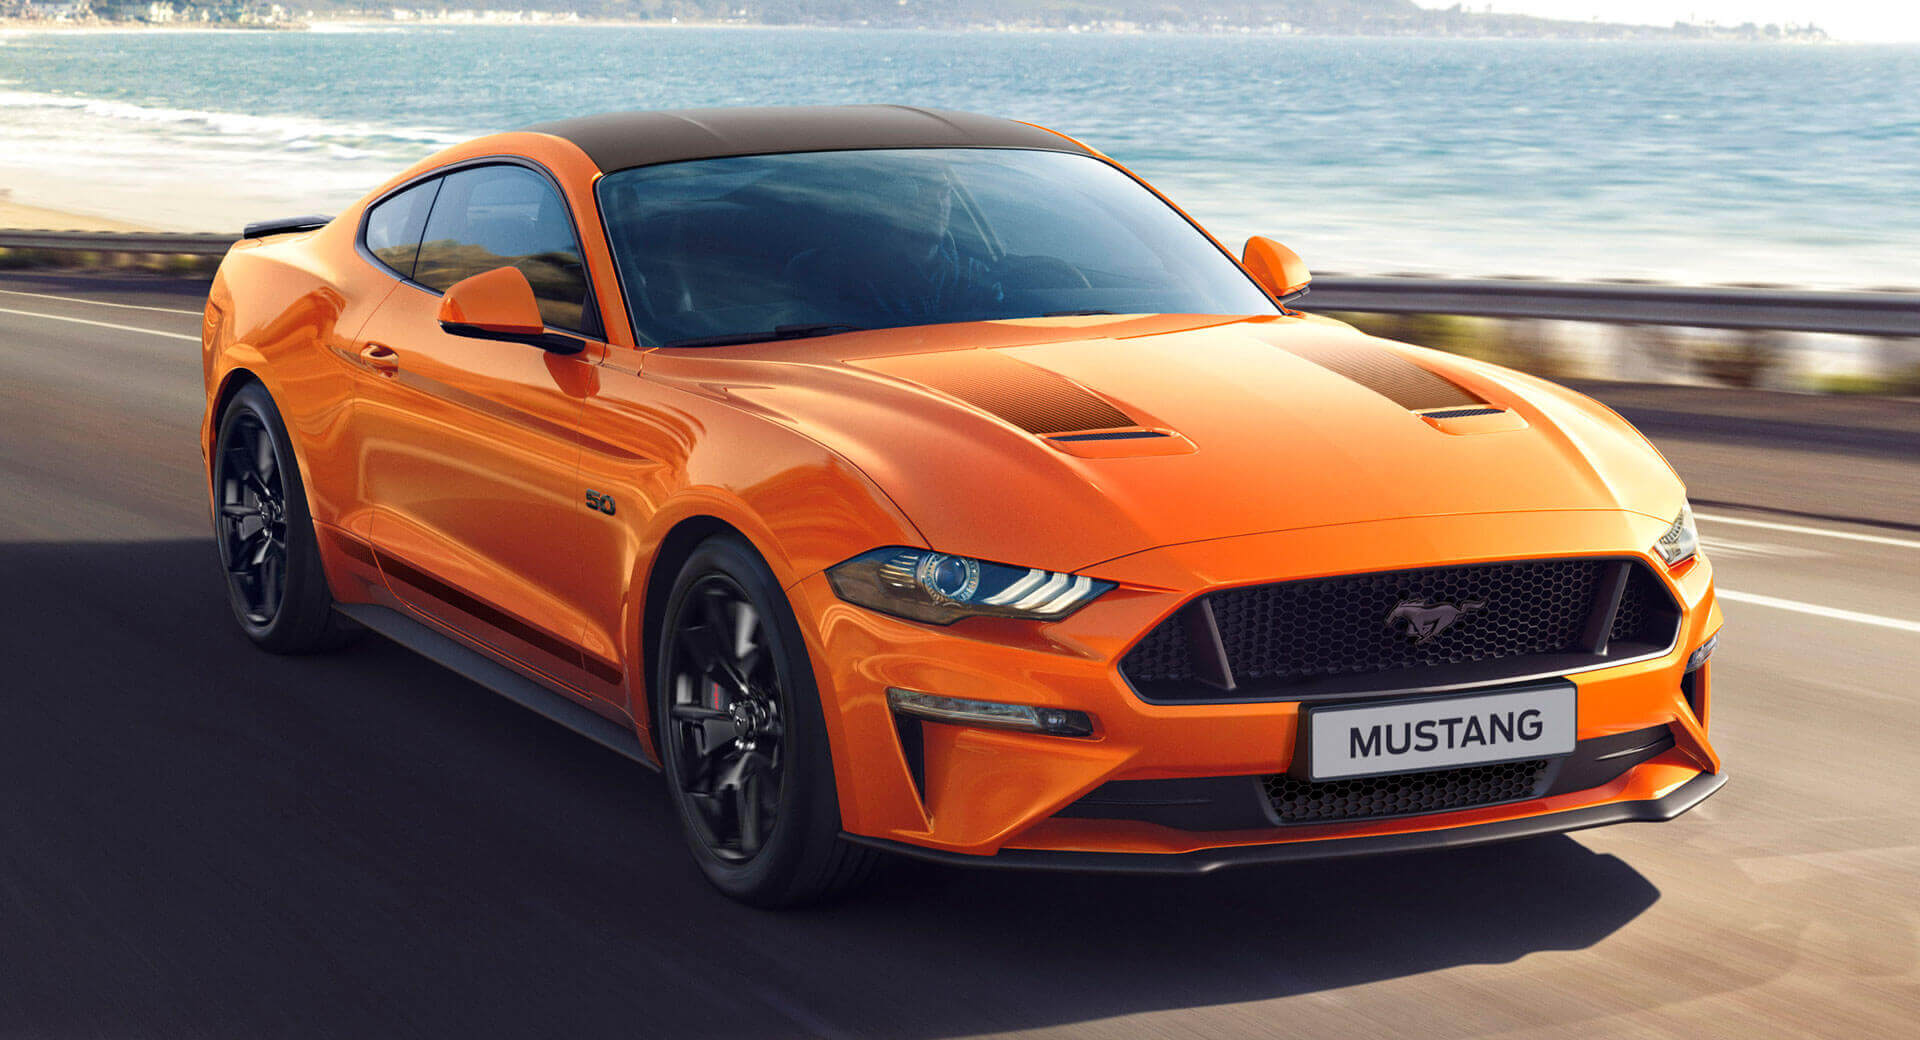 Mustang Of The Day: 2020 Ford Mustang 55